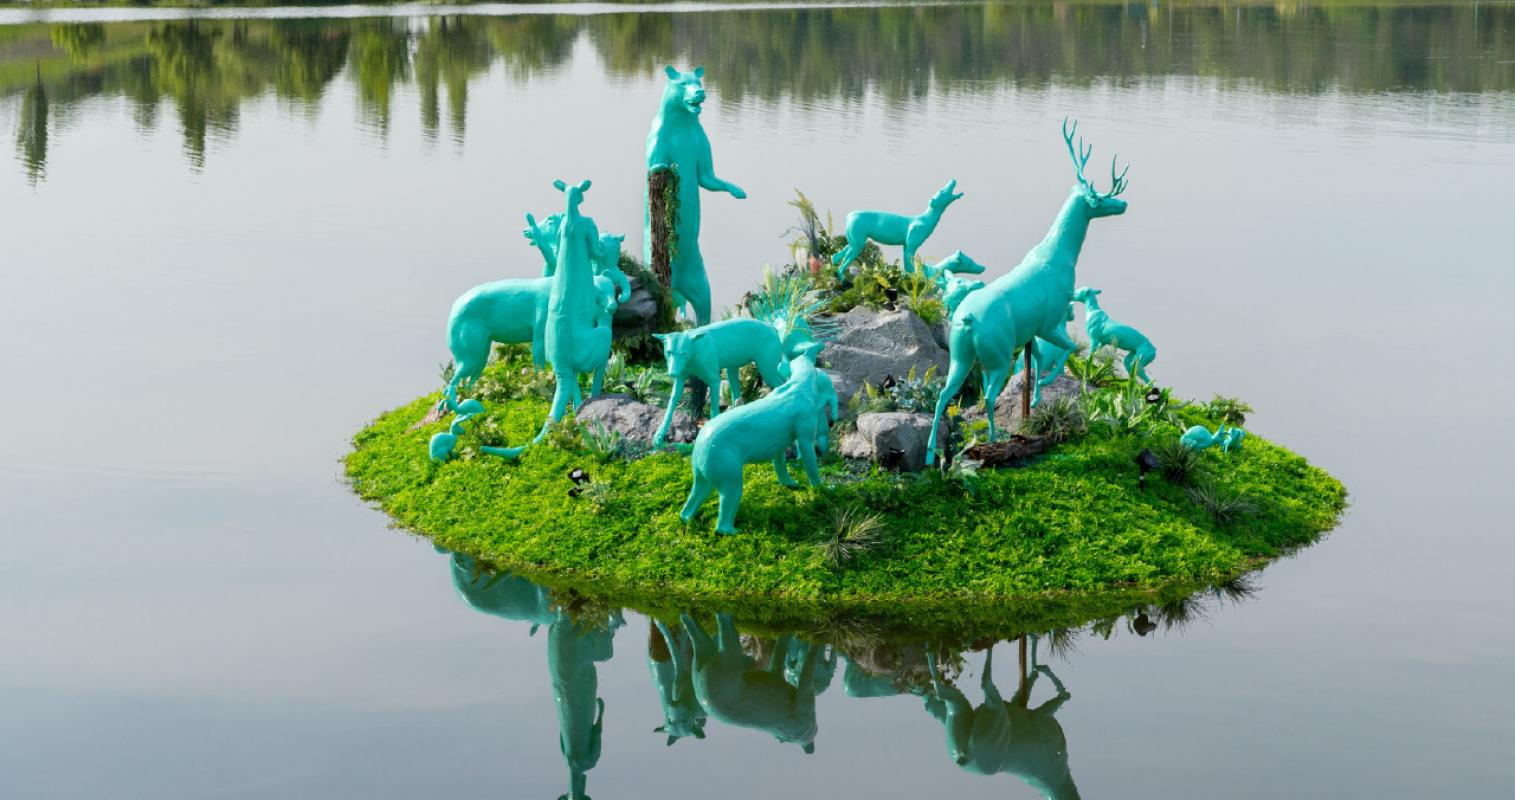 Art installation with model animals all painted blue on a floating island.